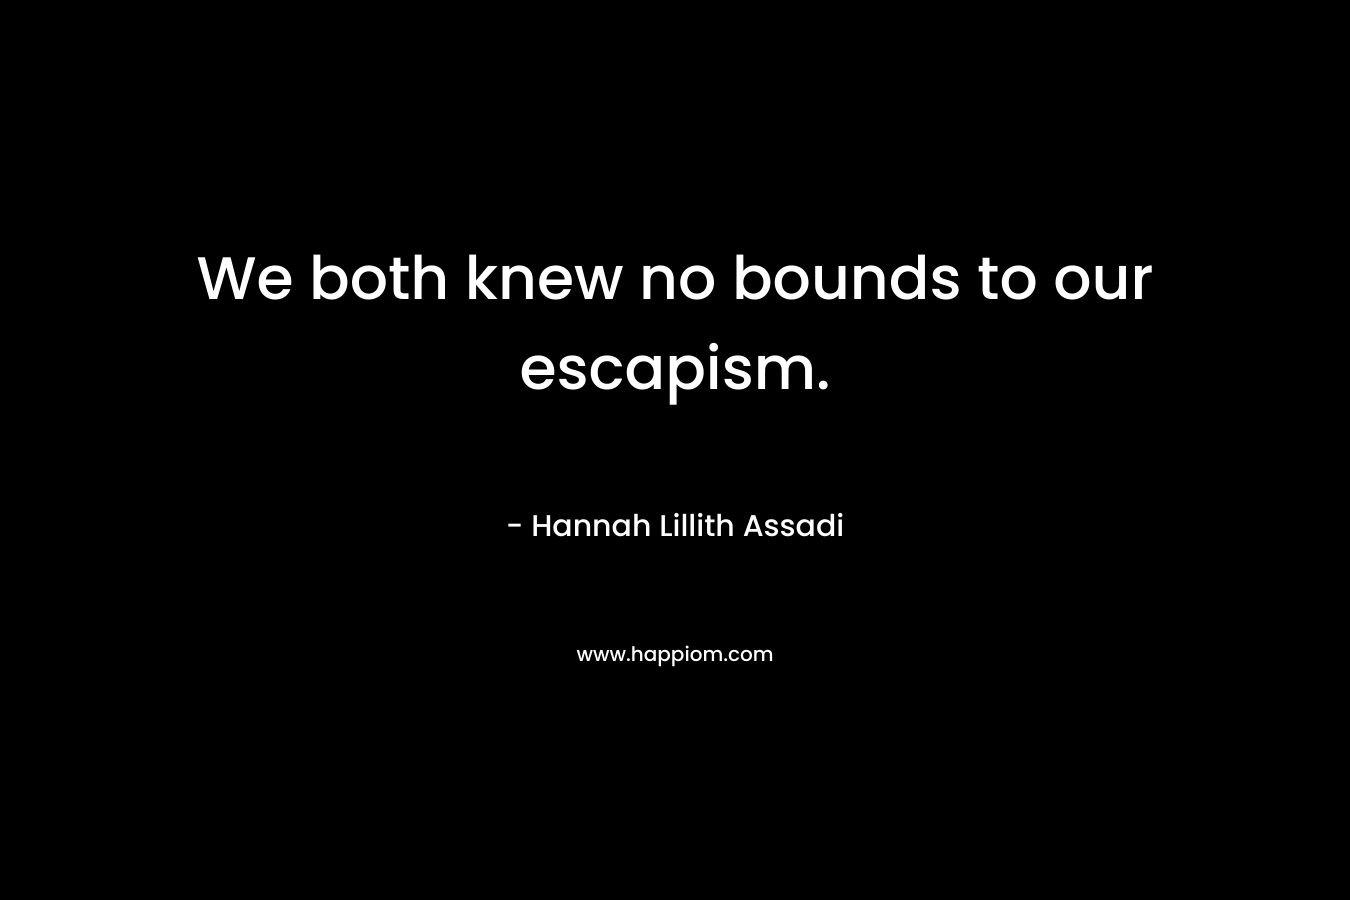 We both knew no bounds to our escapism. – Hannah Lillith Assadi